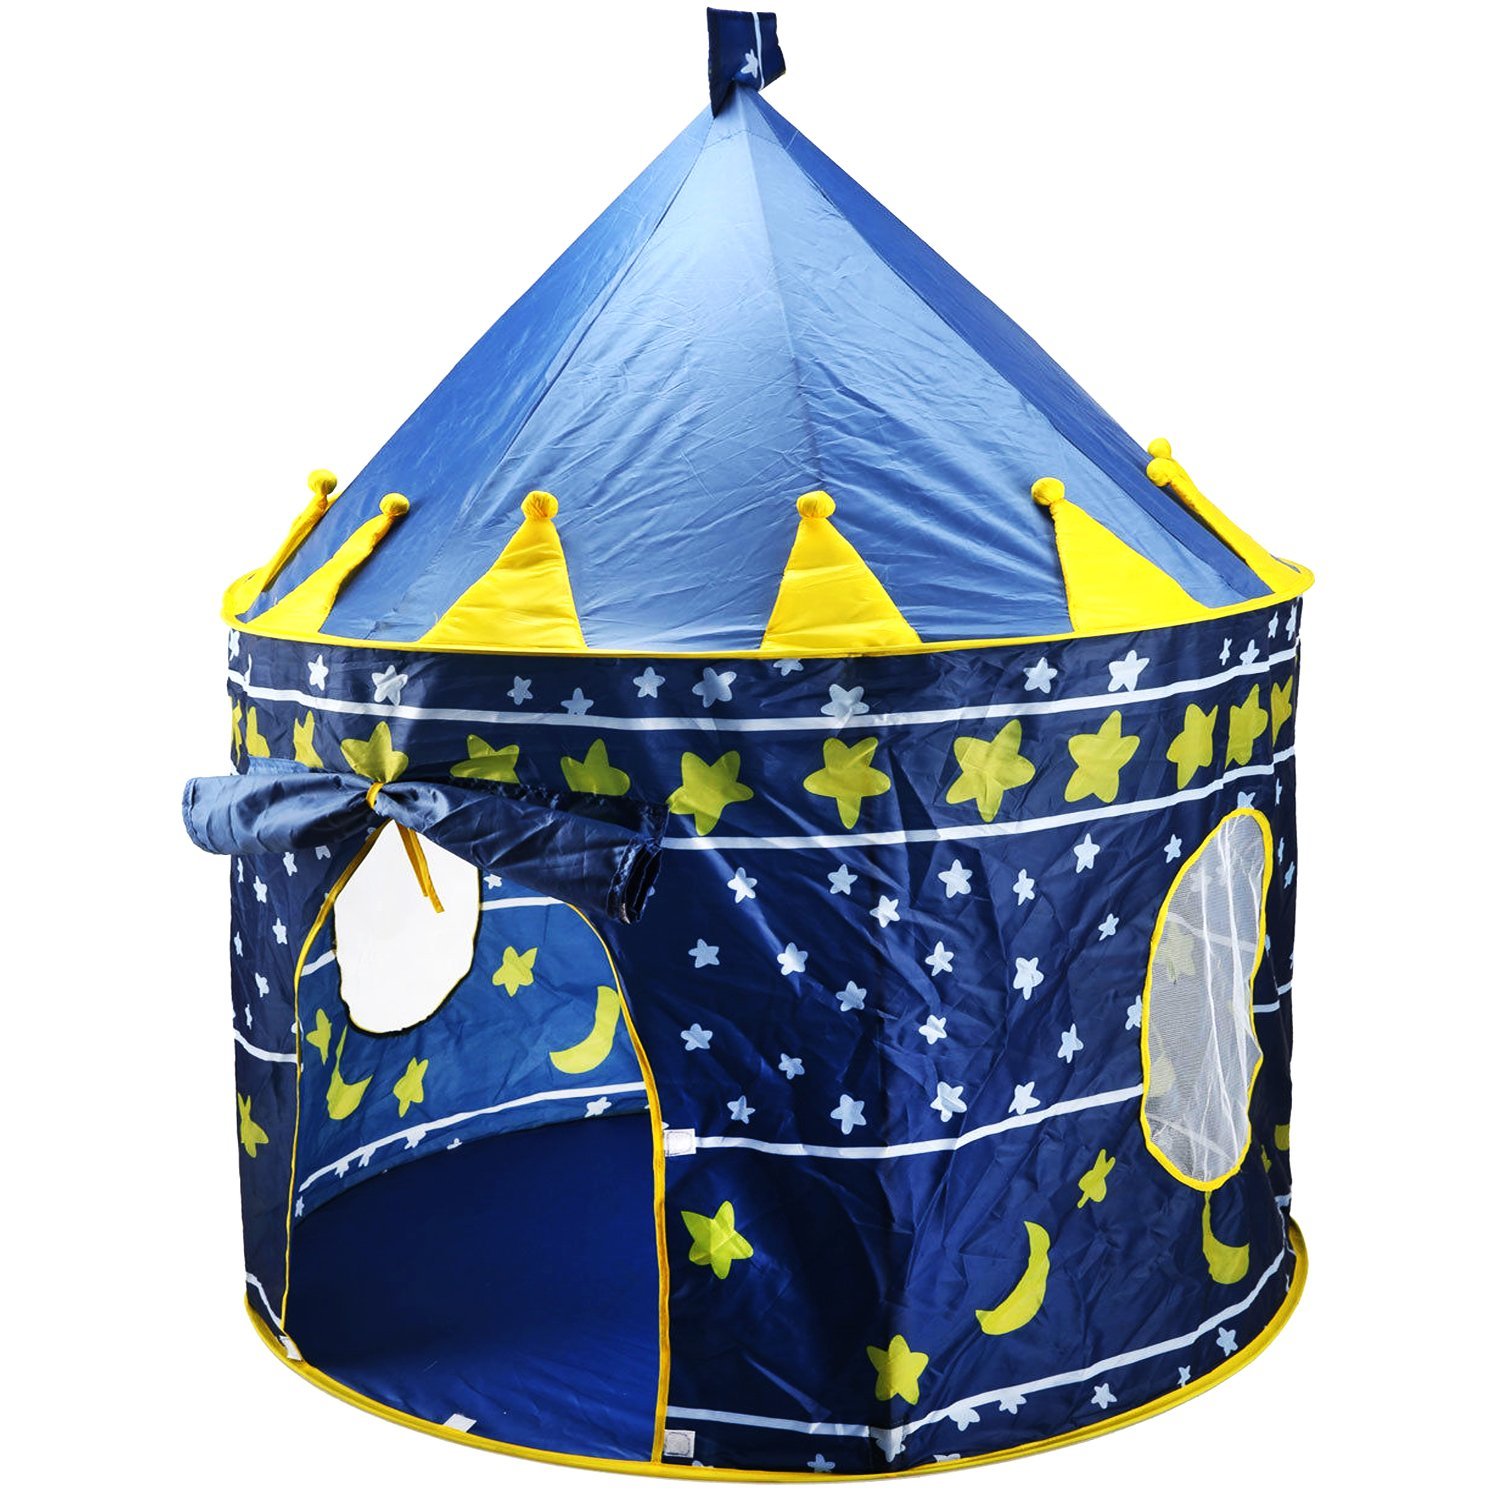 Children Play Tent Boys Girls Prince House Indoor Outdoor Blue Foldable Tent with Case by Creatov - image 1 of 2